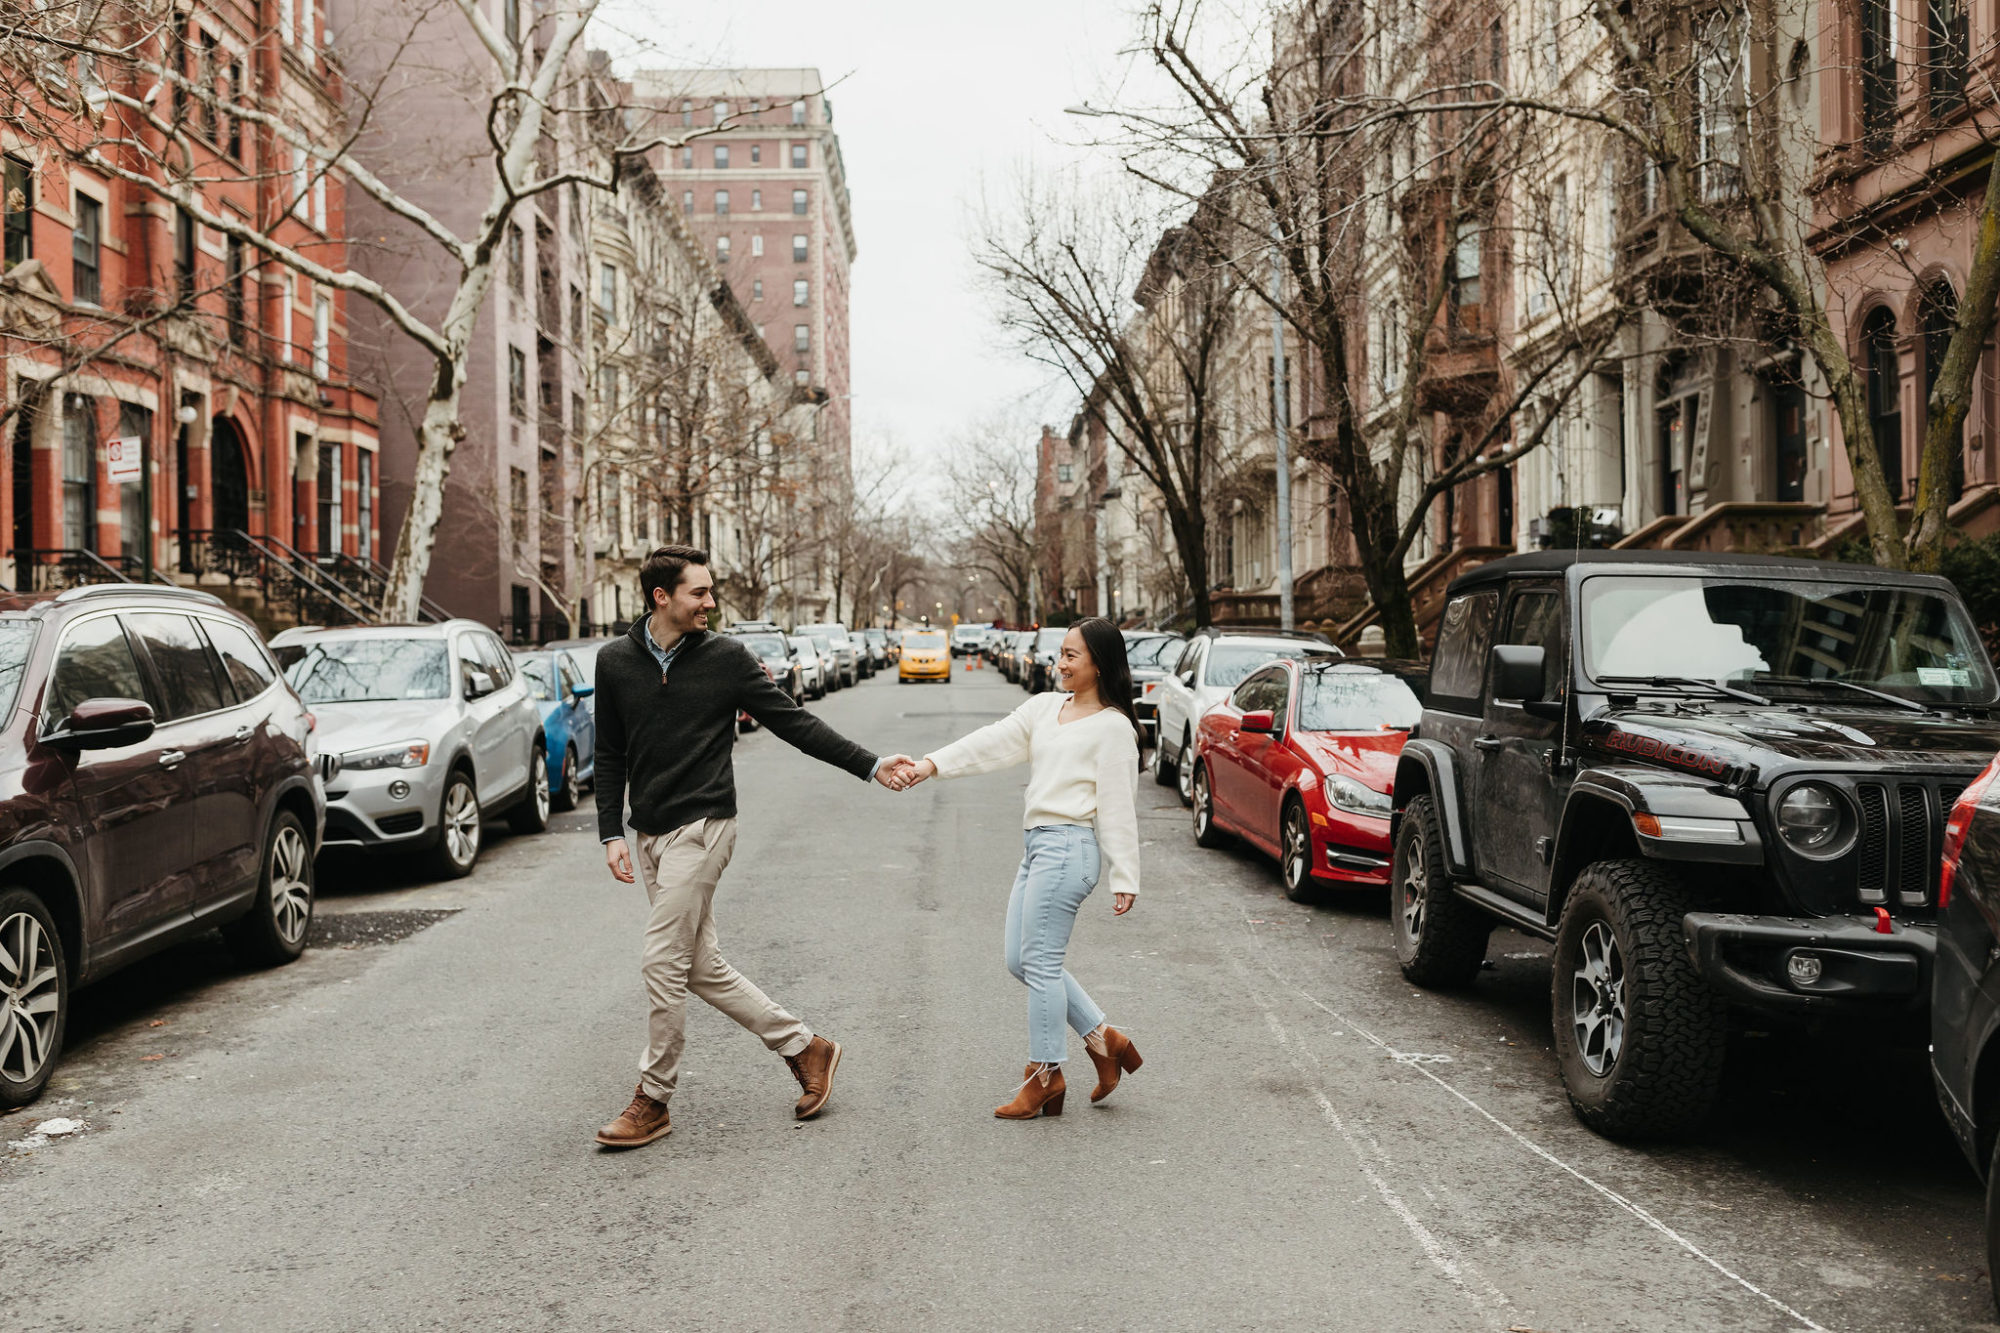 city engagement, urban photography, couples portraits, New York CIty Engagement session, street engagement photos, casual engagement photos, urban engagement photos, brownstone photoshoot, hudson valley wedding photographer, wedding photographer, 